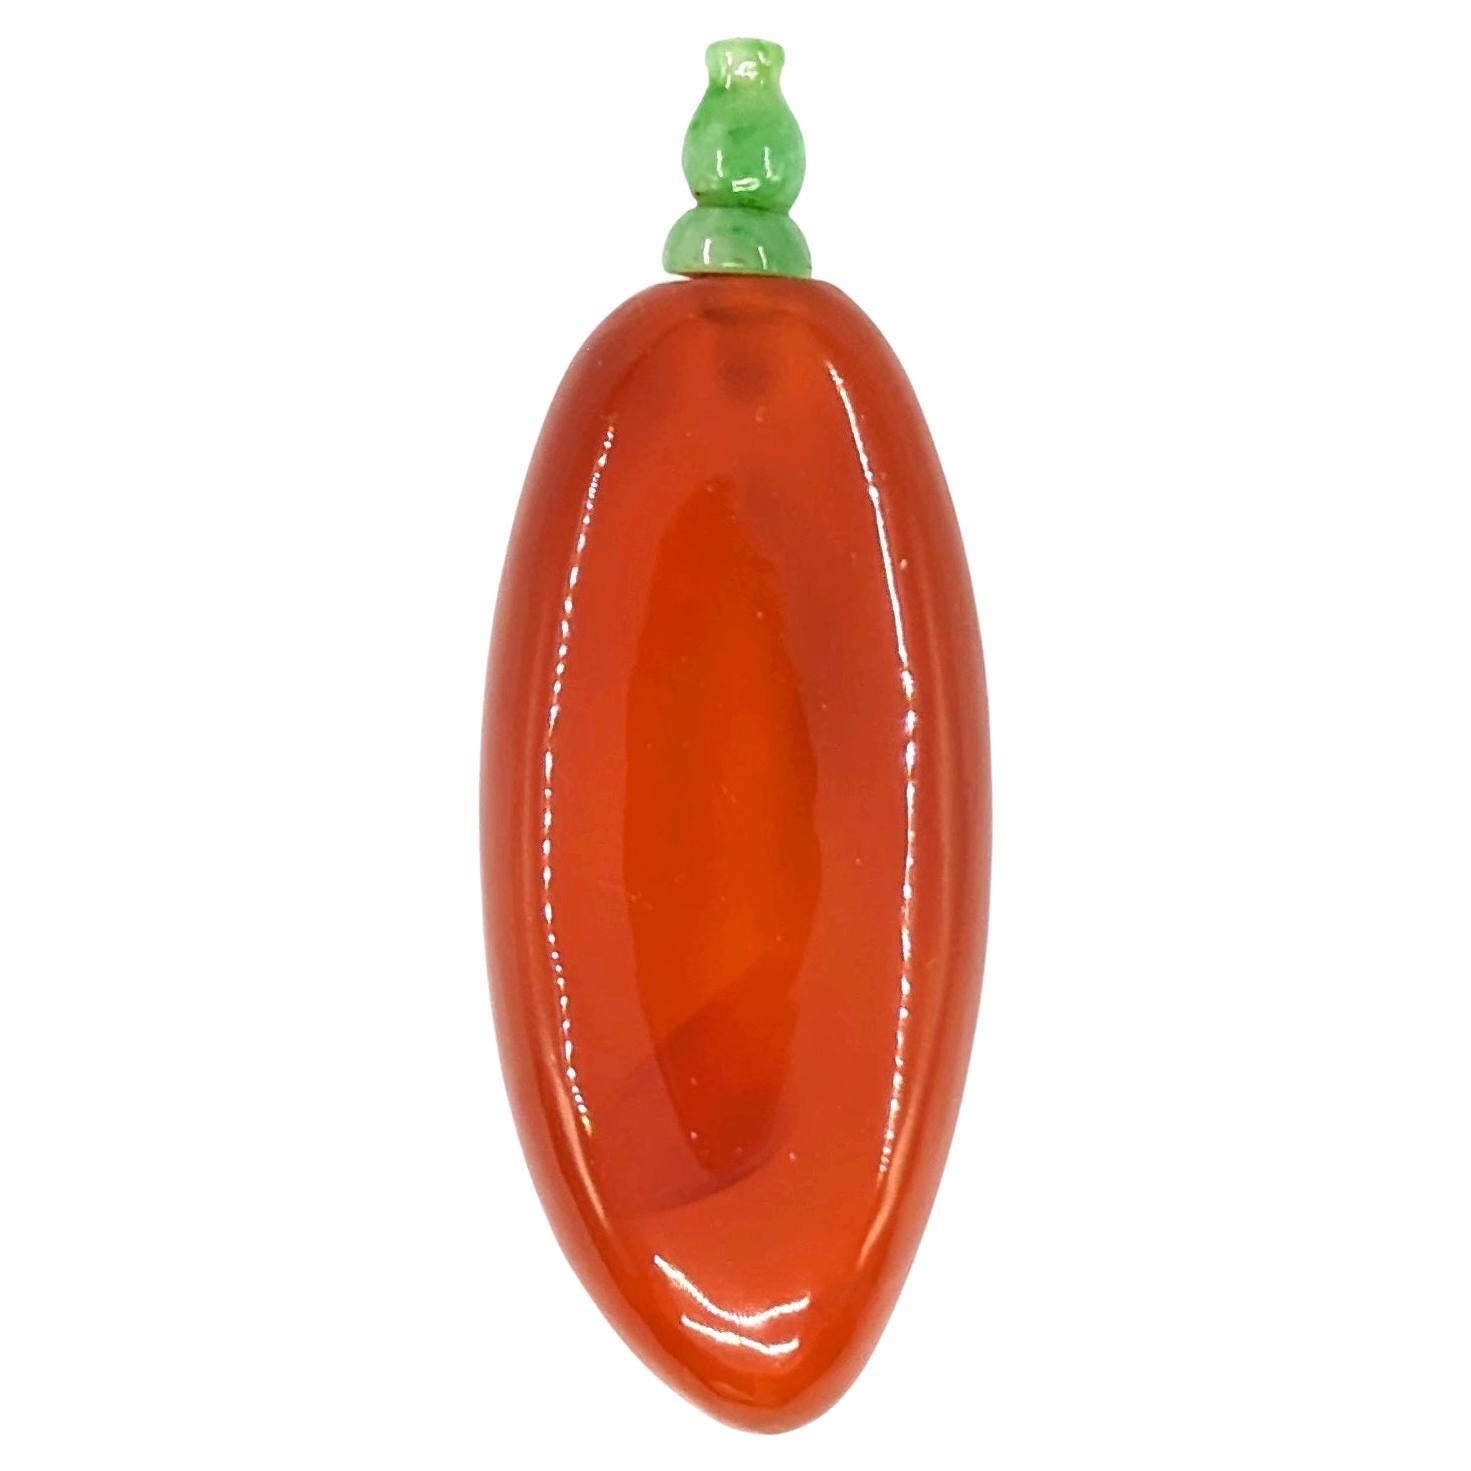 An antique Chinese carved agate snuff bottle with a carved green jadeite stopper. The intense red agate material shows real life likeness of a red pepper in shape and color, and is well accented with a hulu double gourd shaped jadeite stopper and